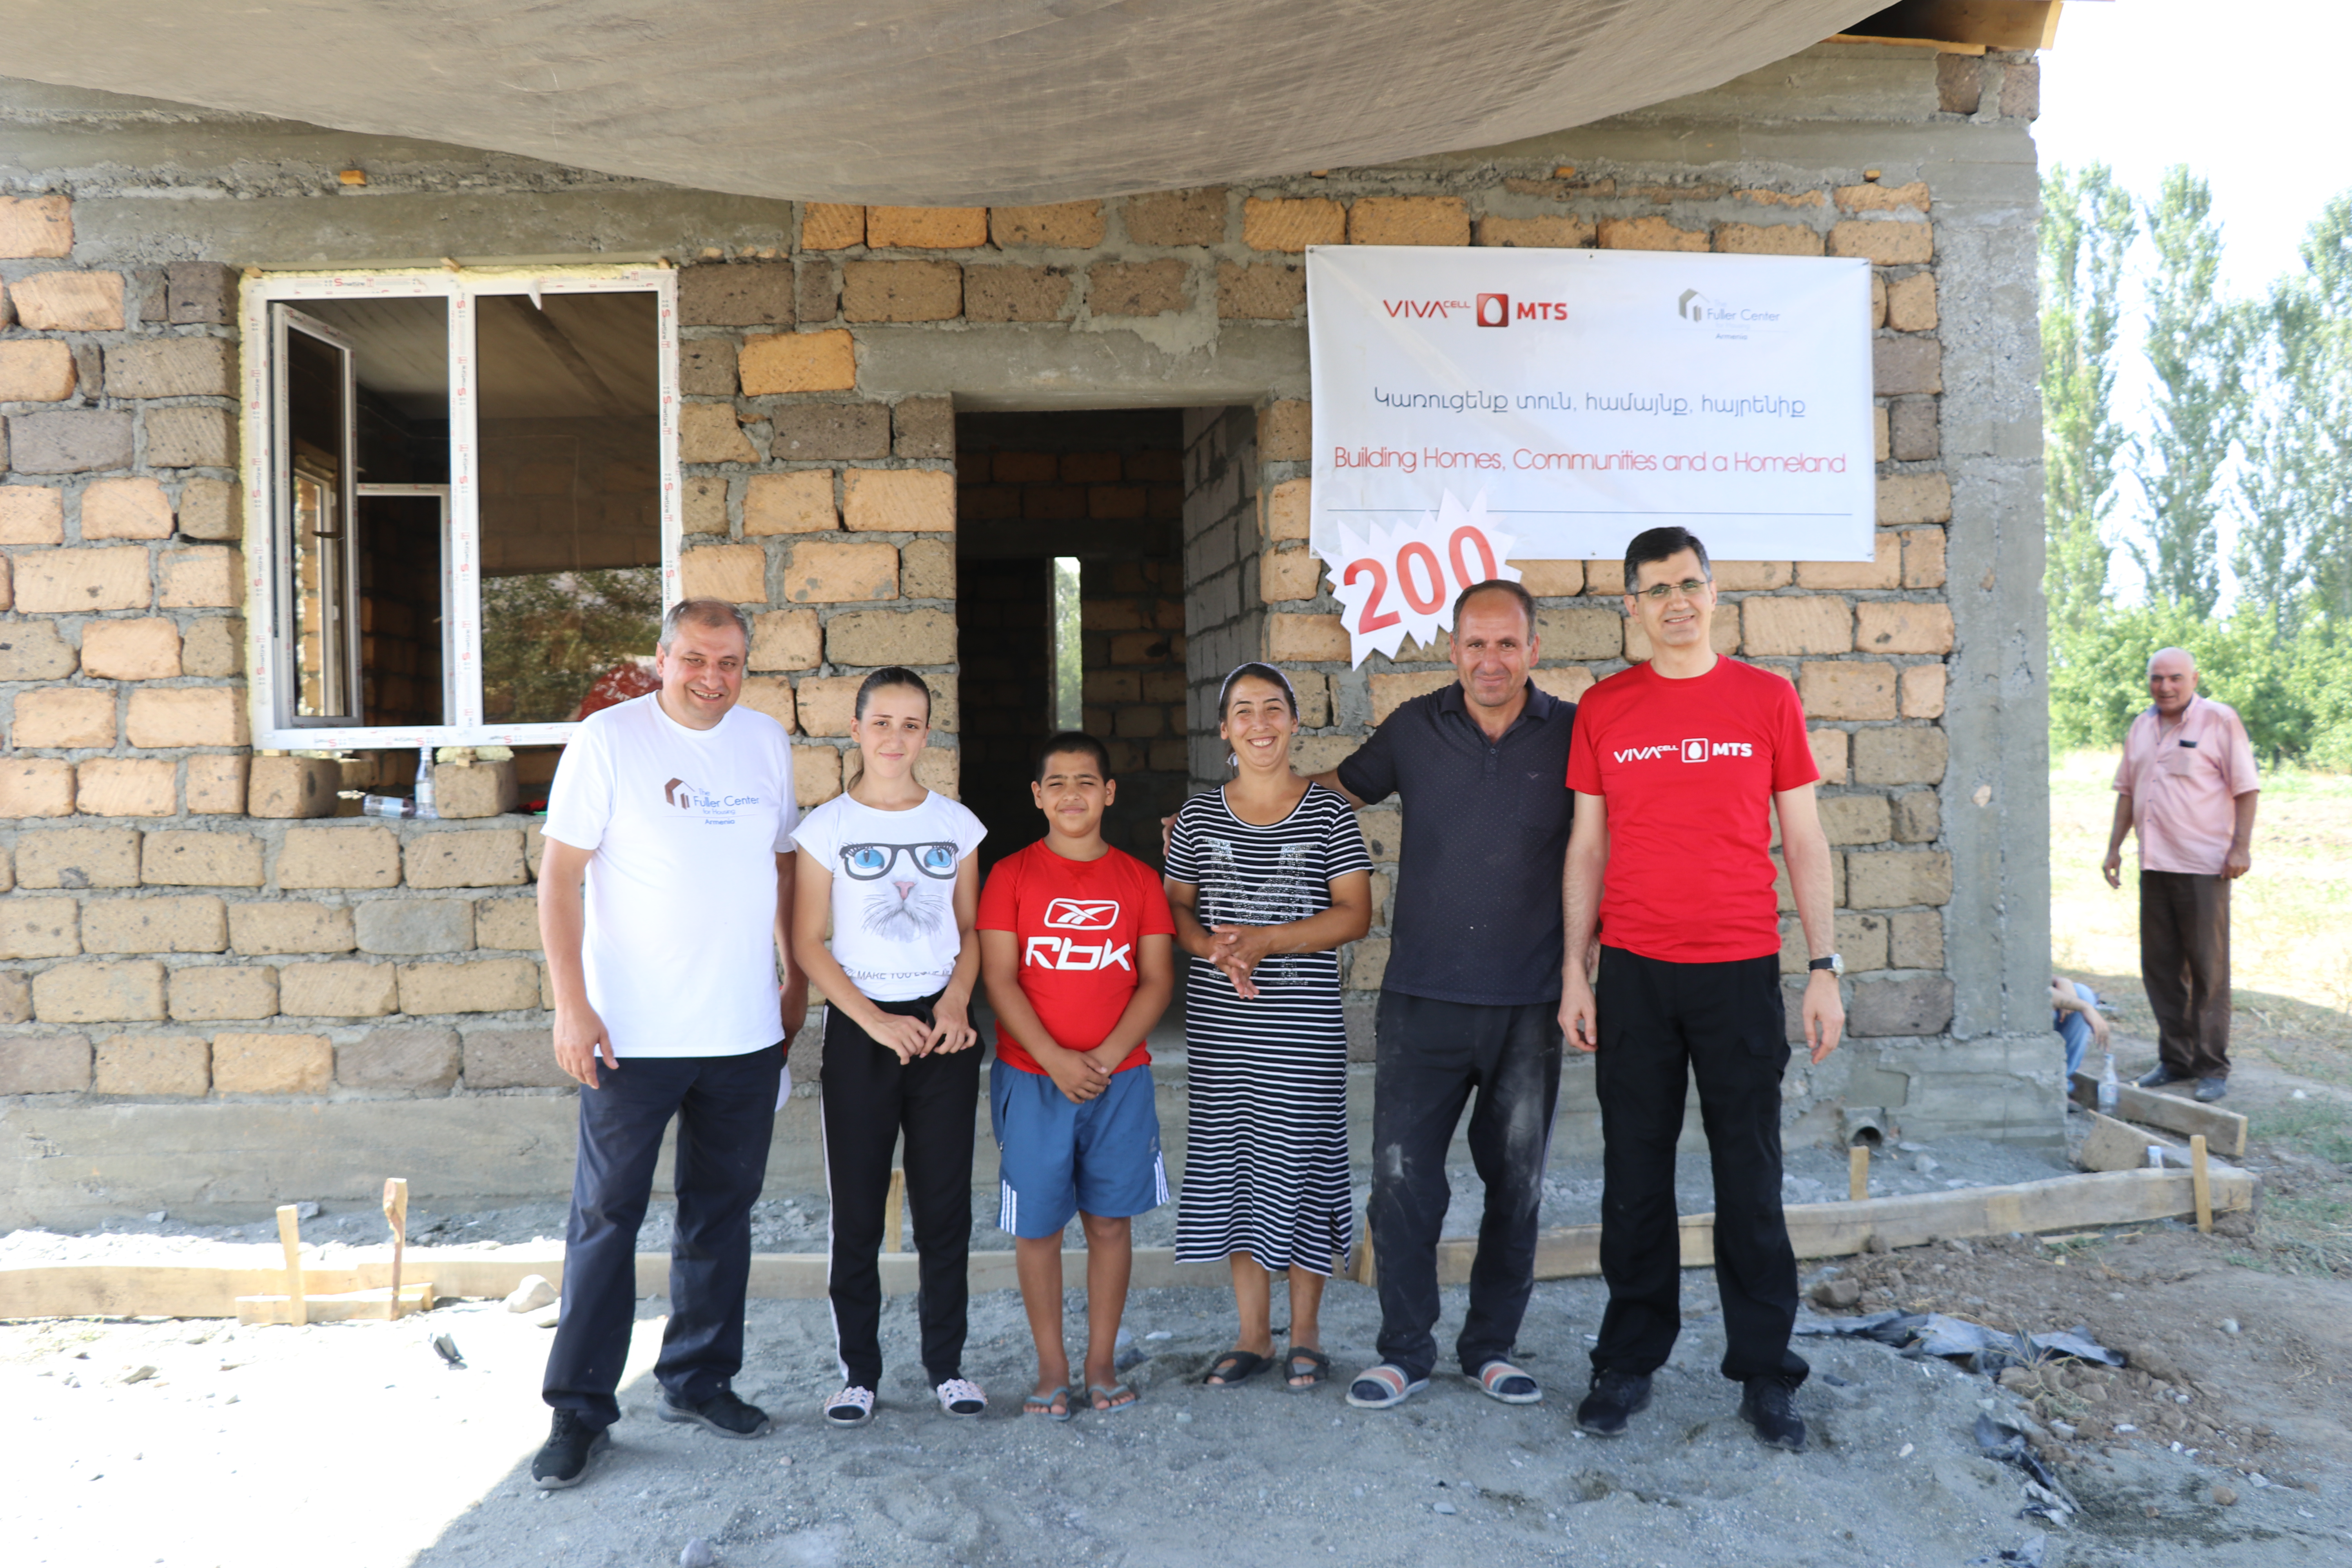 More than 200 homes have been built through VivaCell-MTS&FCHA Partnership